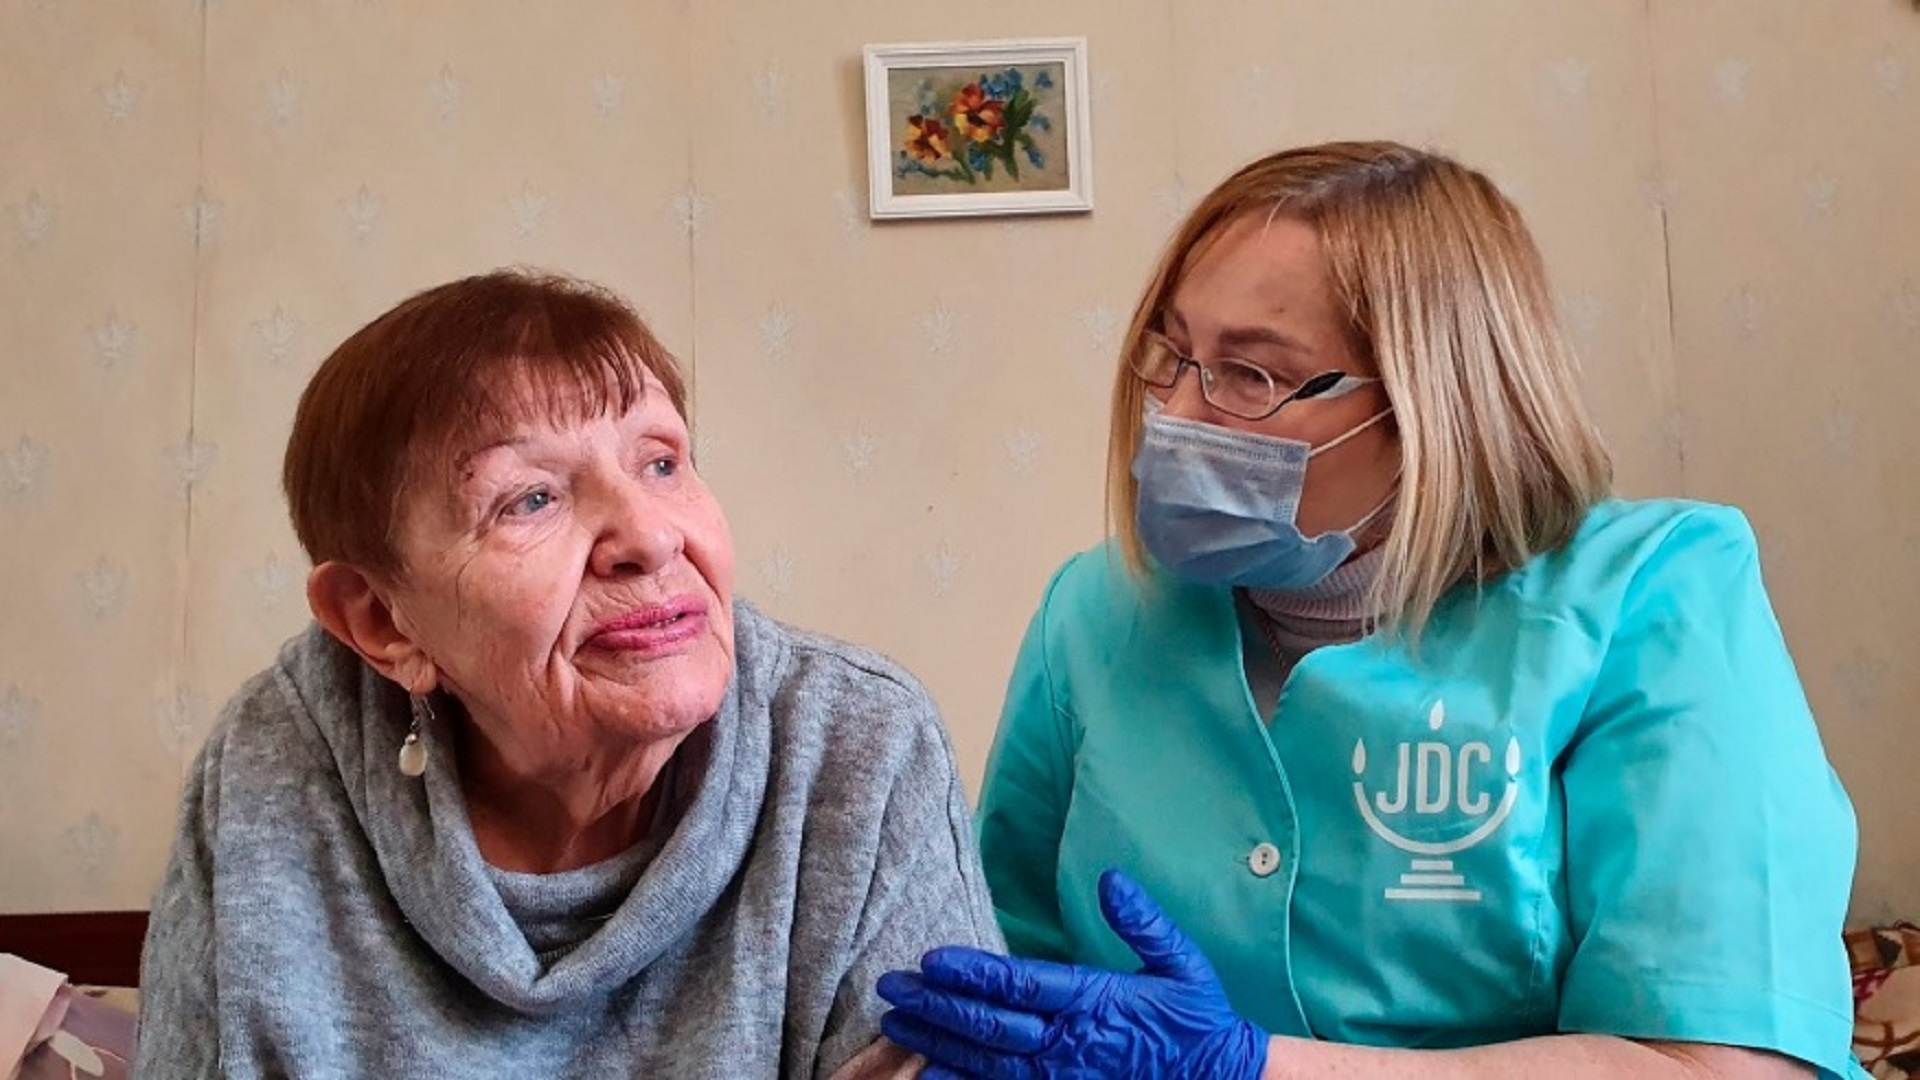  Natalia Berezhnaya, left, is seen in Odessa, Ukraine, in this undated photo with her home care worker as one of approximately 5,200 Holocaust survivors in Ukraine who receives ongoing home care funded by the Claims Conference and implemented by the 